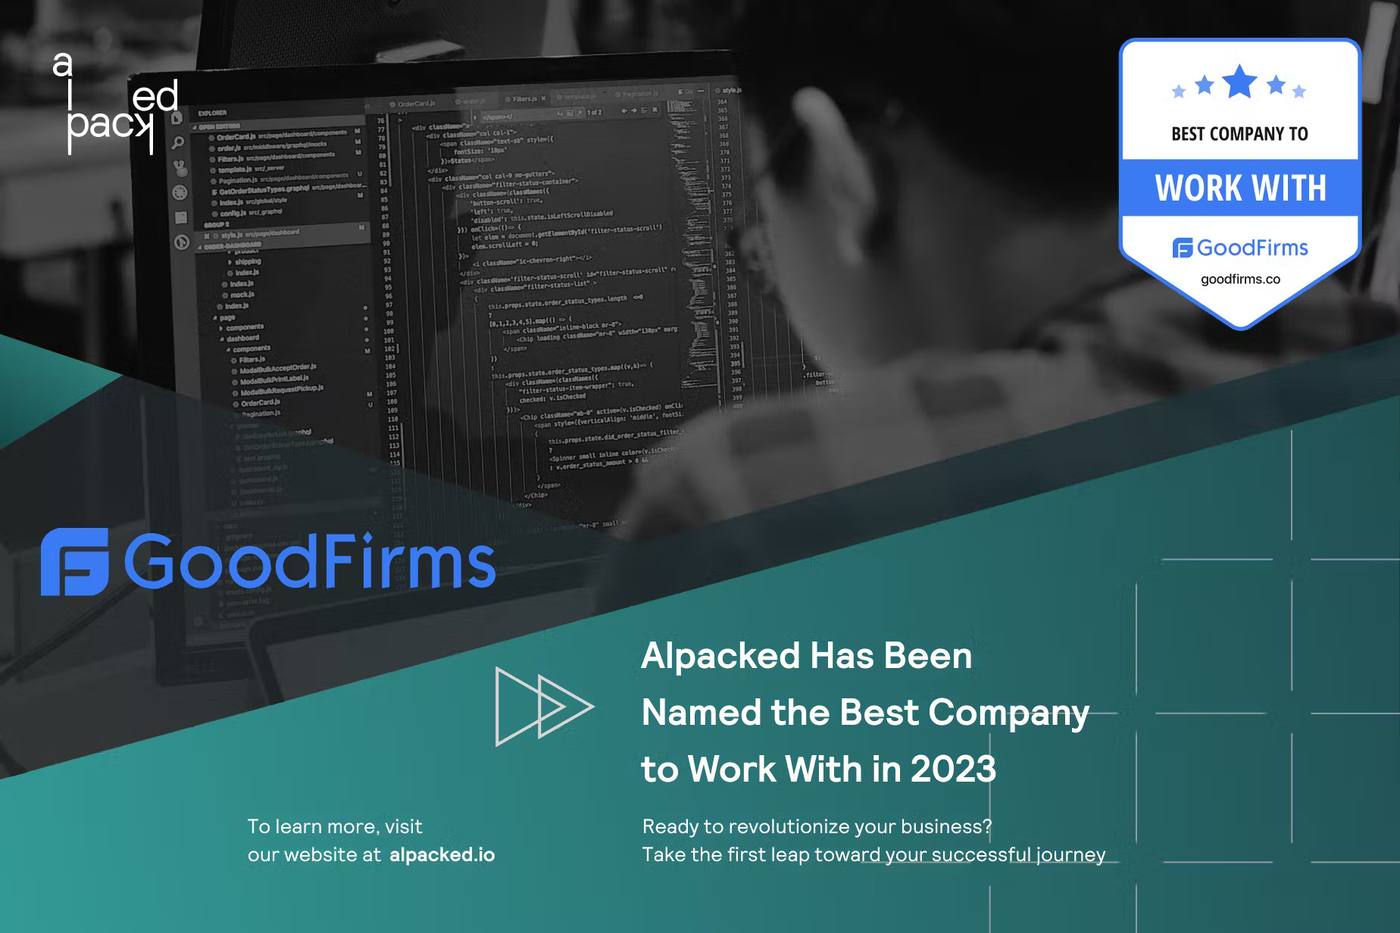 Alpacked Is Recognized by GoodFirms as the Best Company to Work With thumbnail